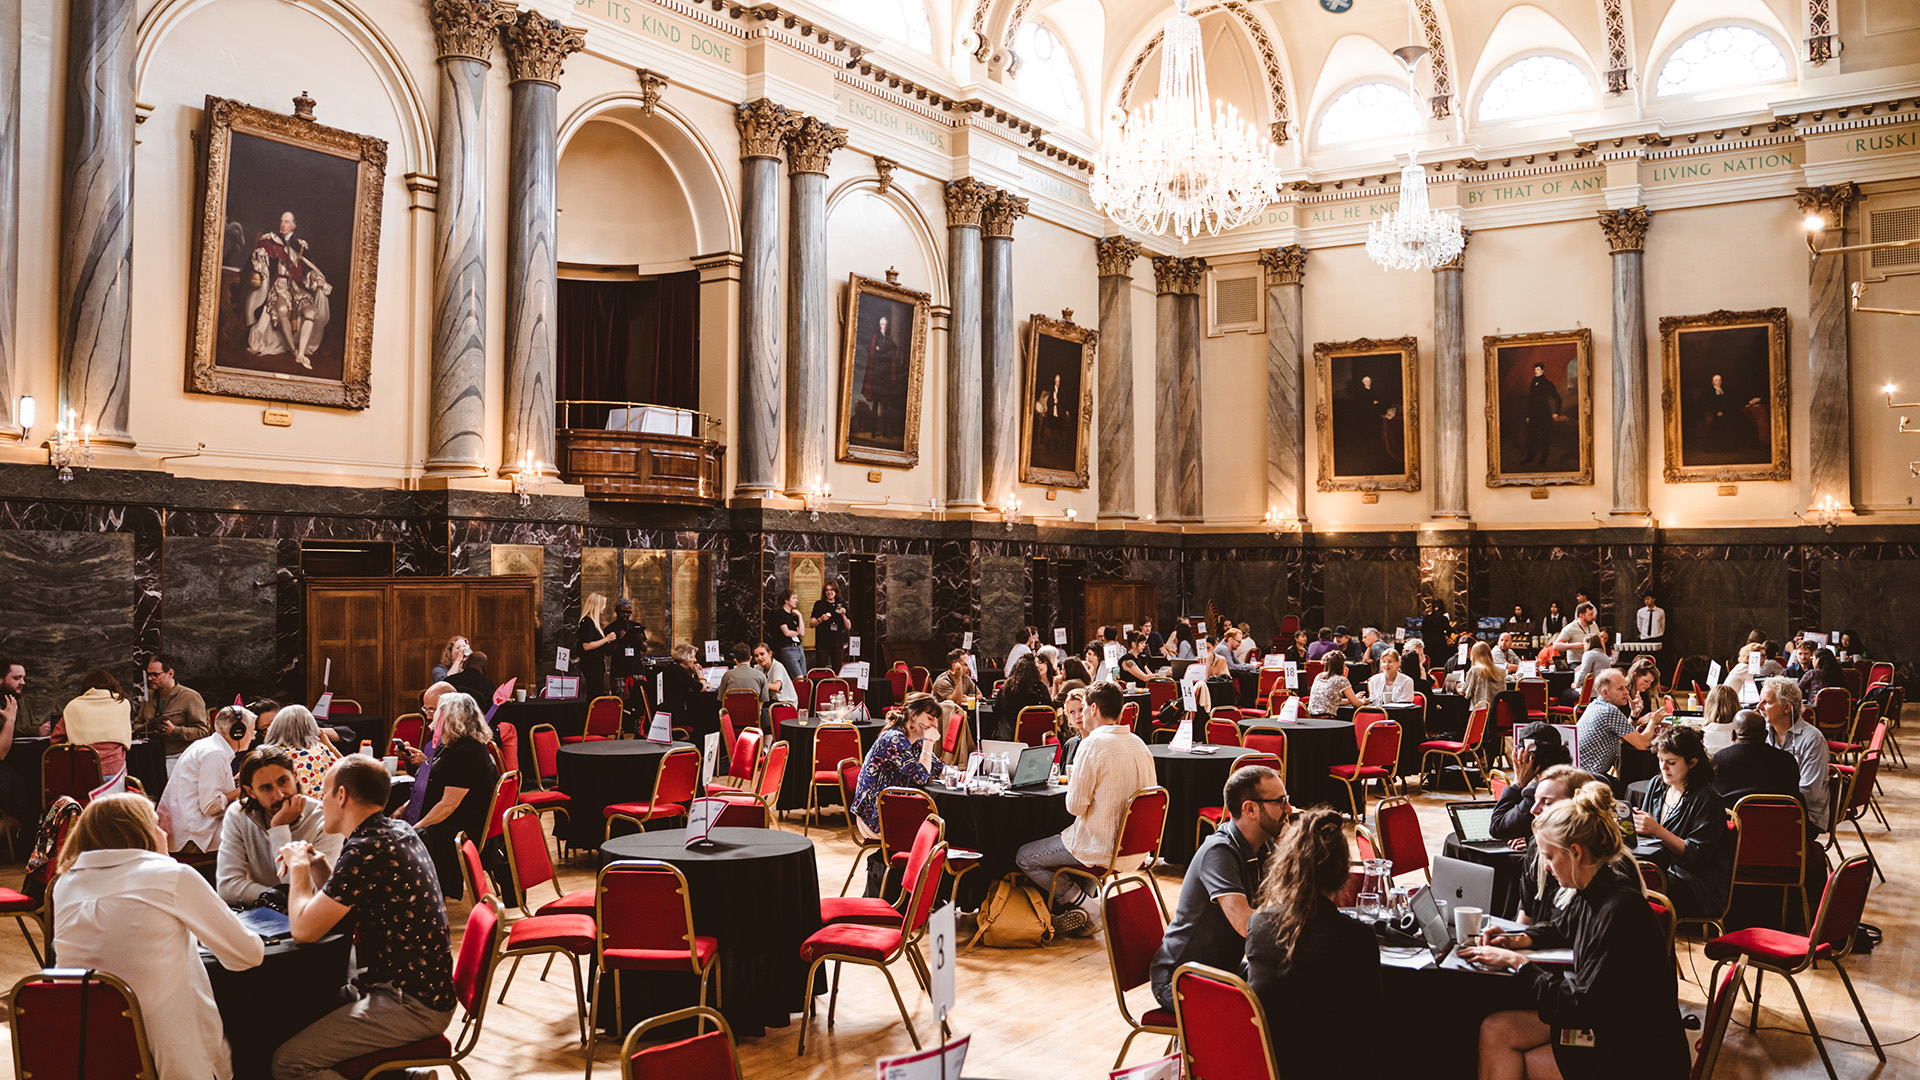 Groups of people sat at tables, in discussion, in a grand hall.